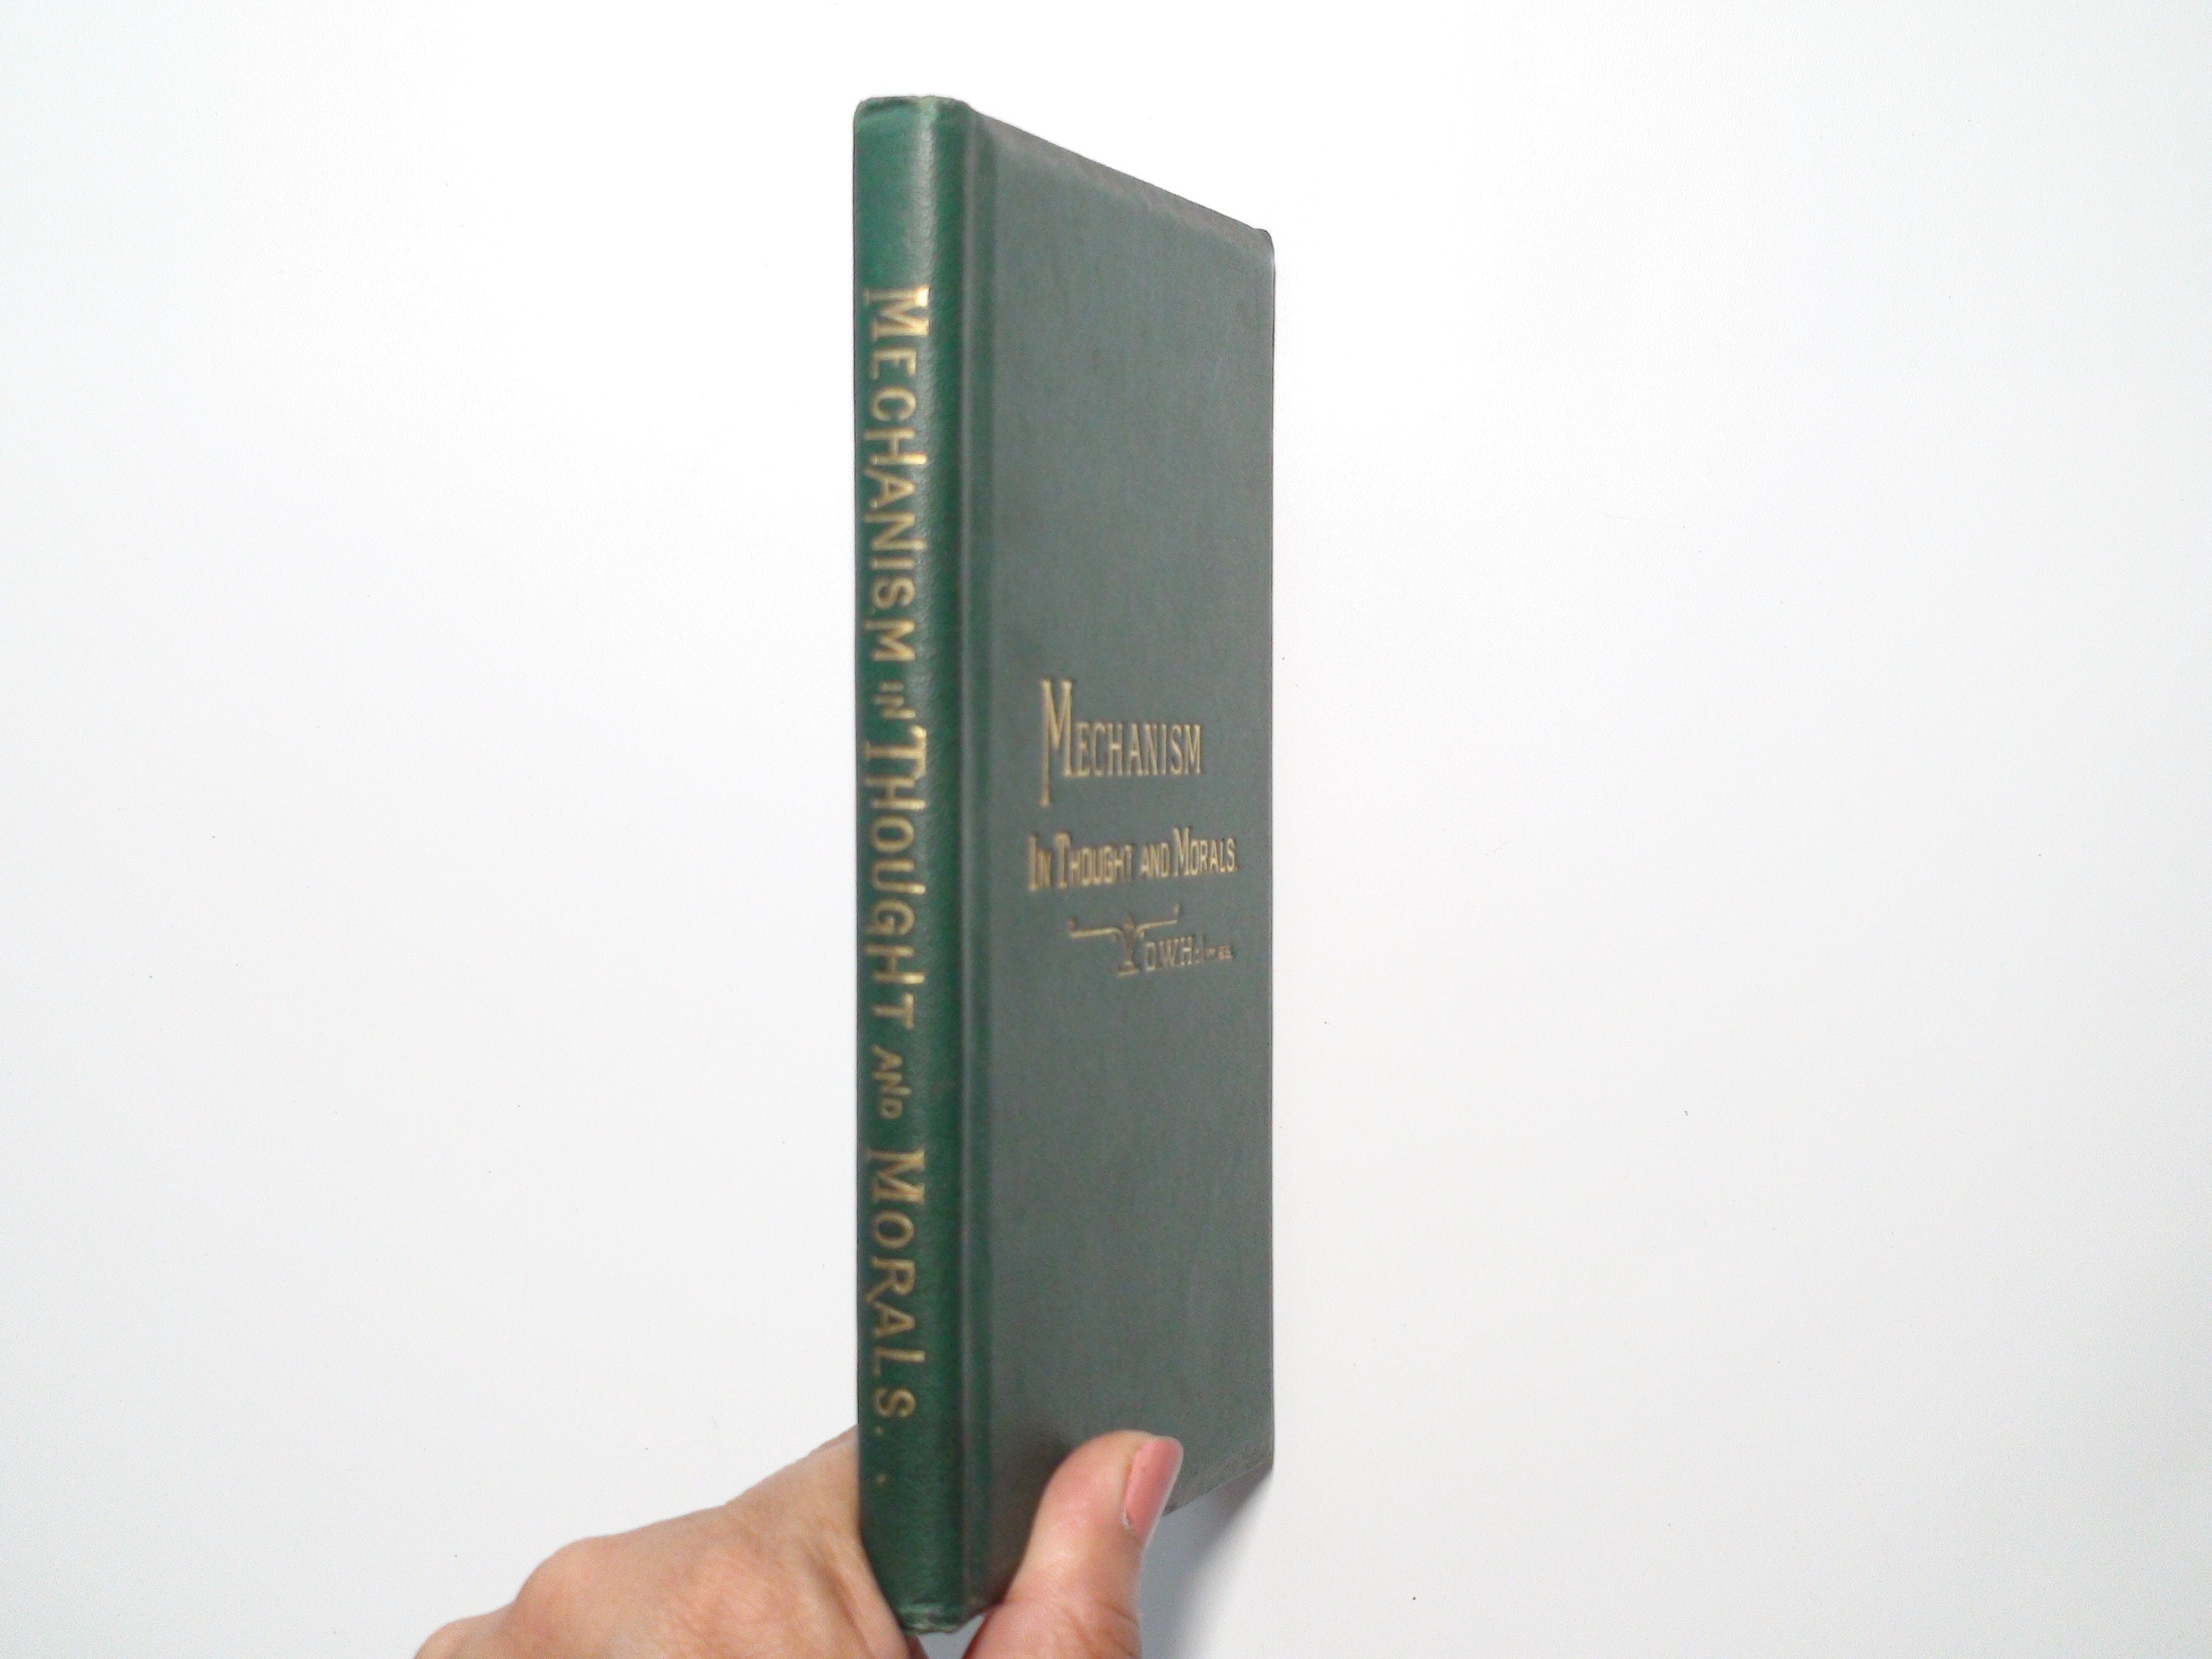 Mechanism in Thought and Morals, Oliver Wendell Holmes, 1st Ed, 1871